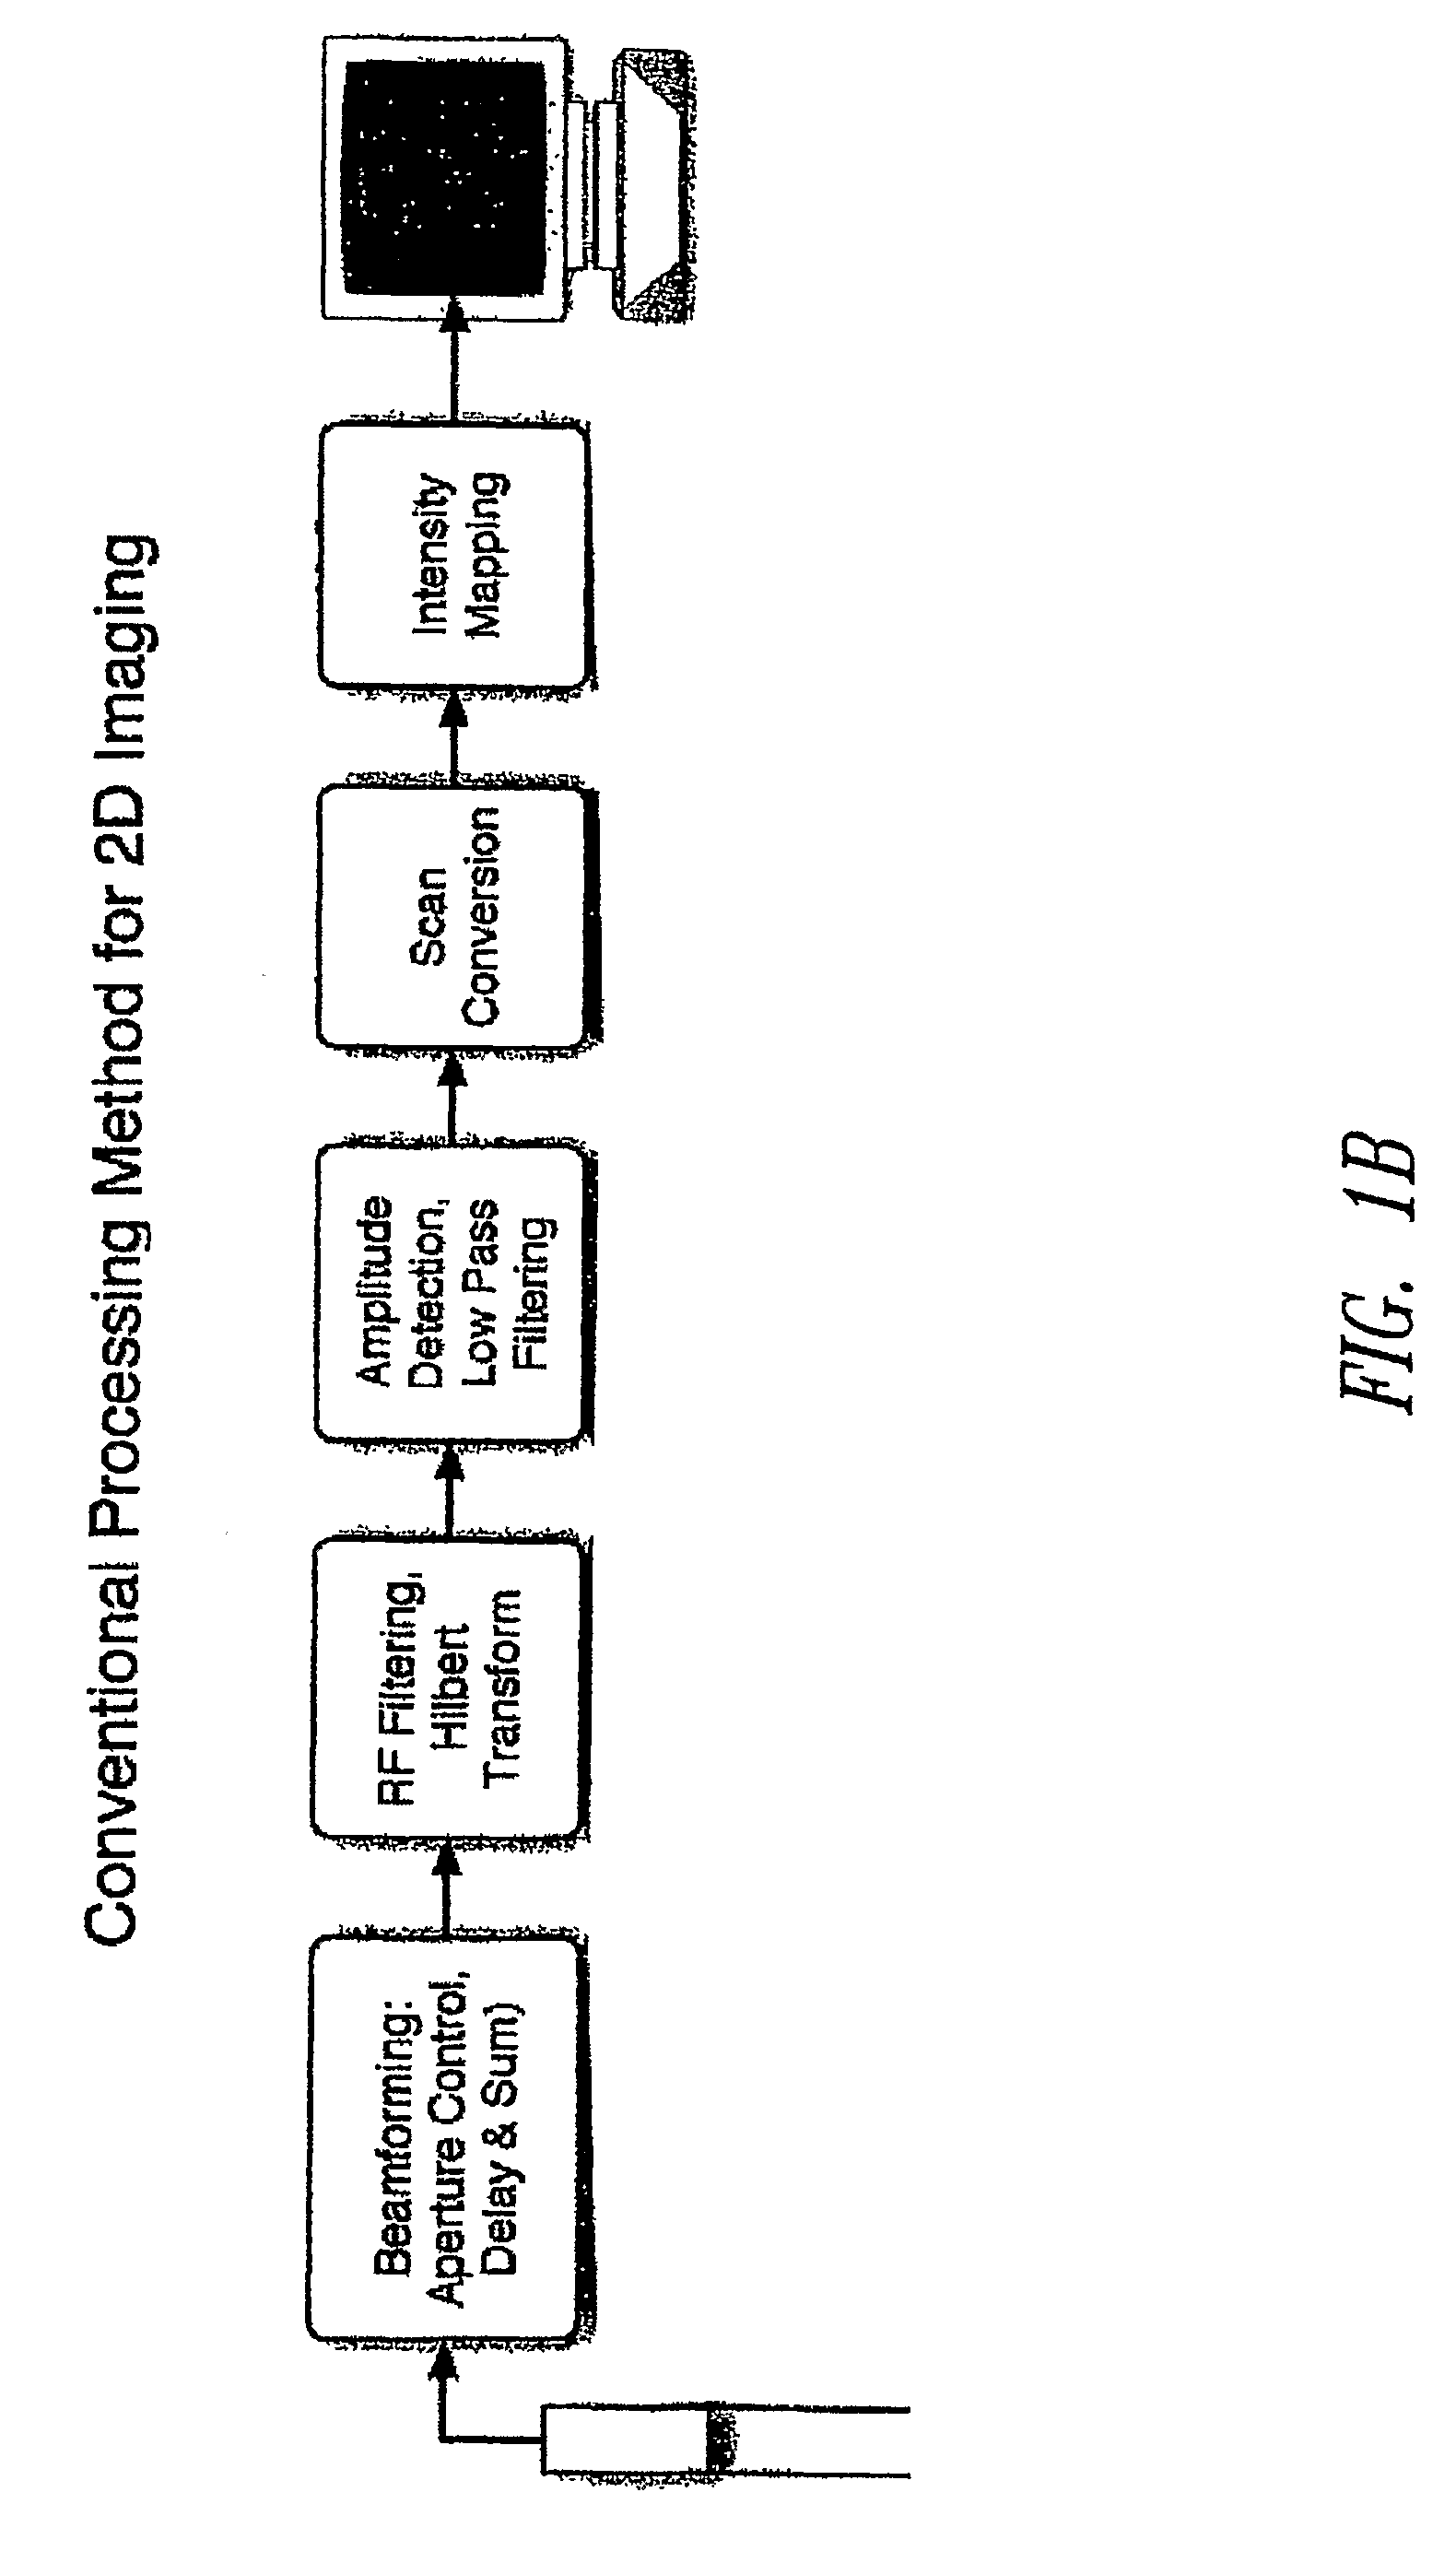 Ultrasound imaging system with pixel oriented processing